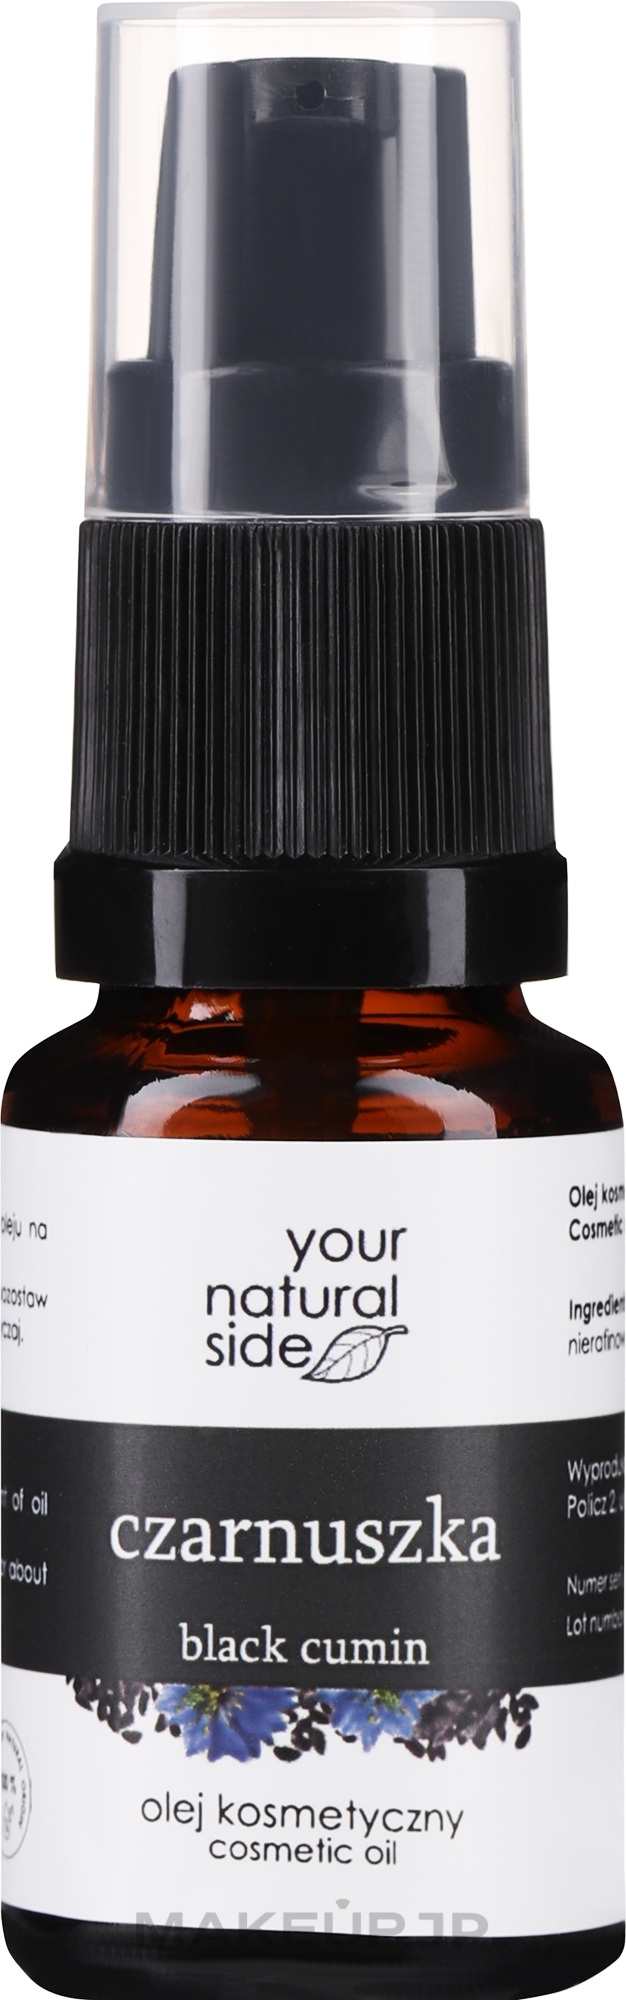 Black Cumin Body Oil - Your Natural Side Olej  — photo 10 ml